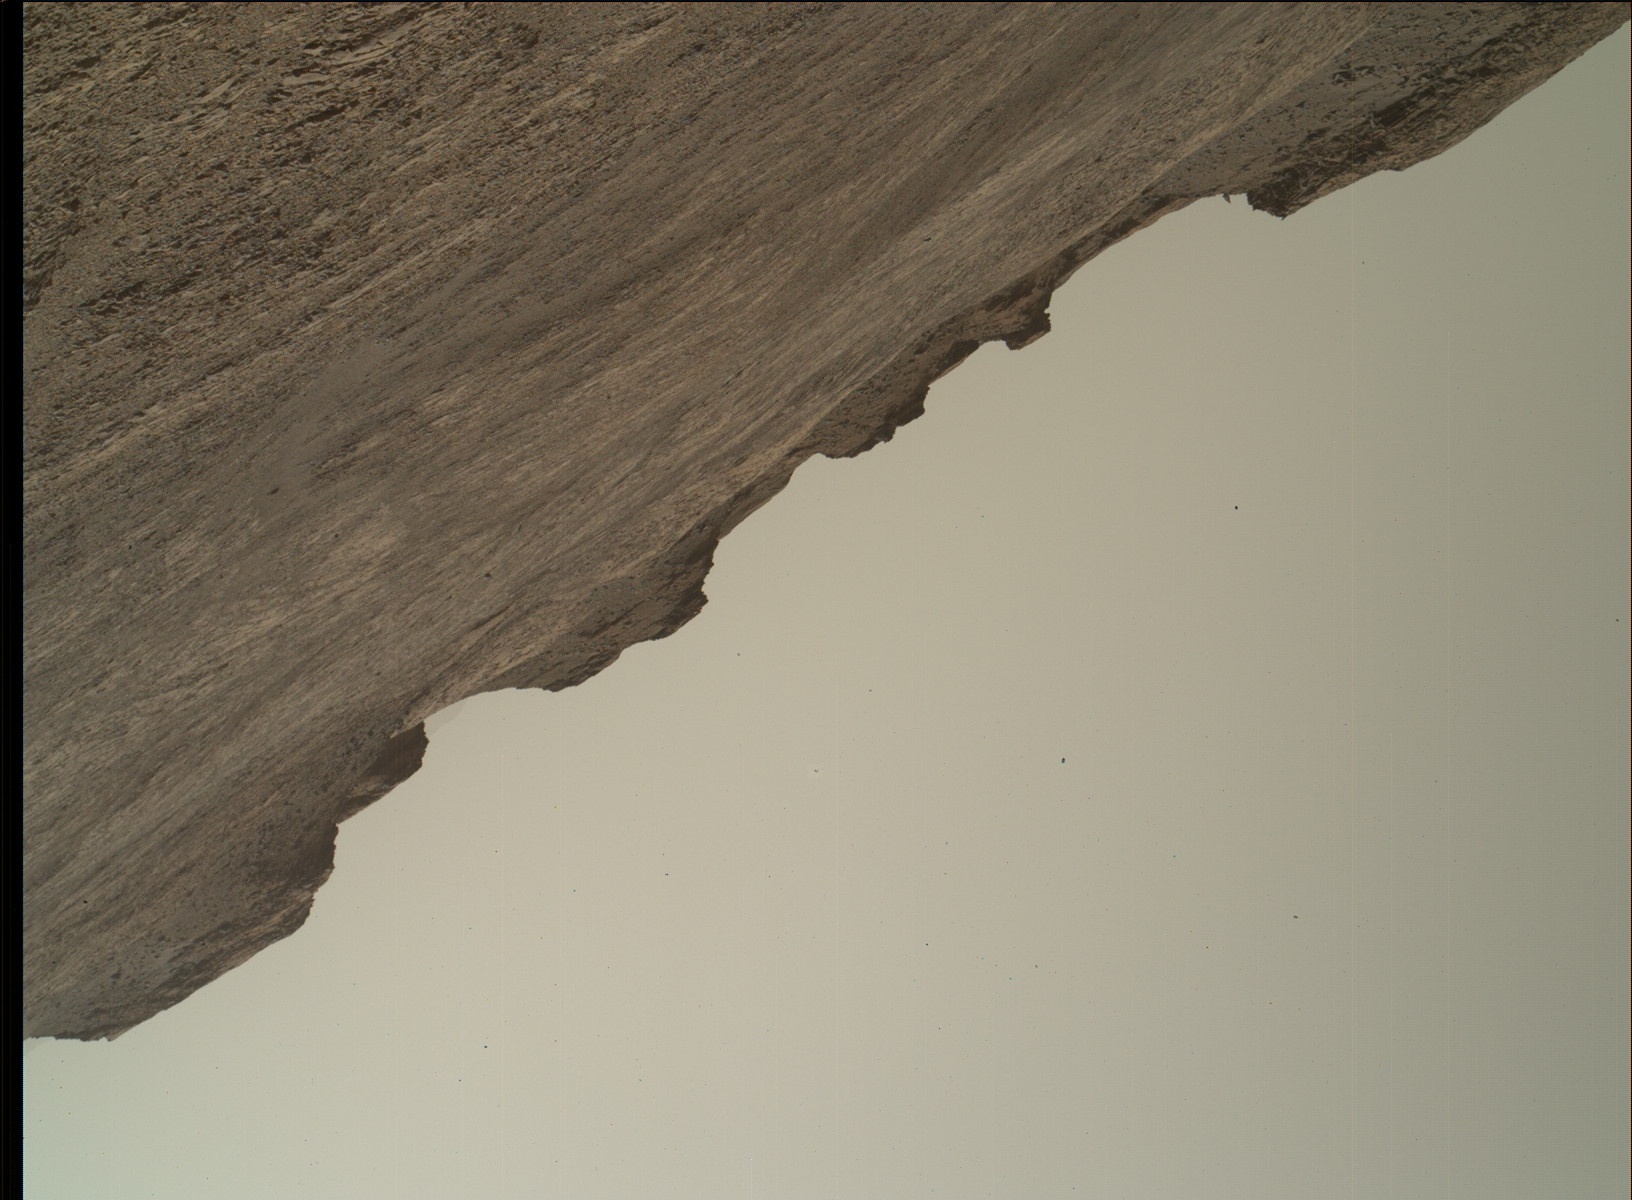 Nasa's Mars rover Curiosity acquired this image using its Mars Hand Lens Imager (MAHLI) on Sol 1401